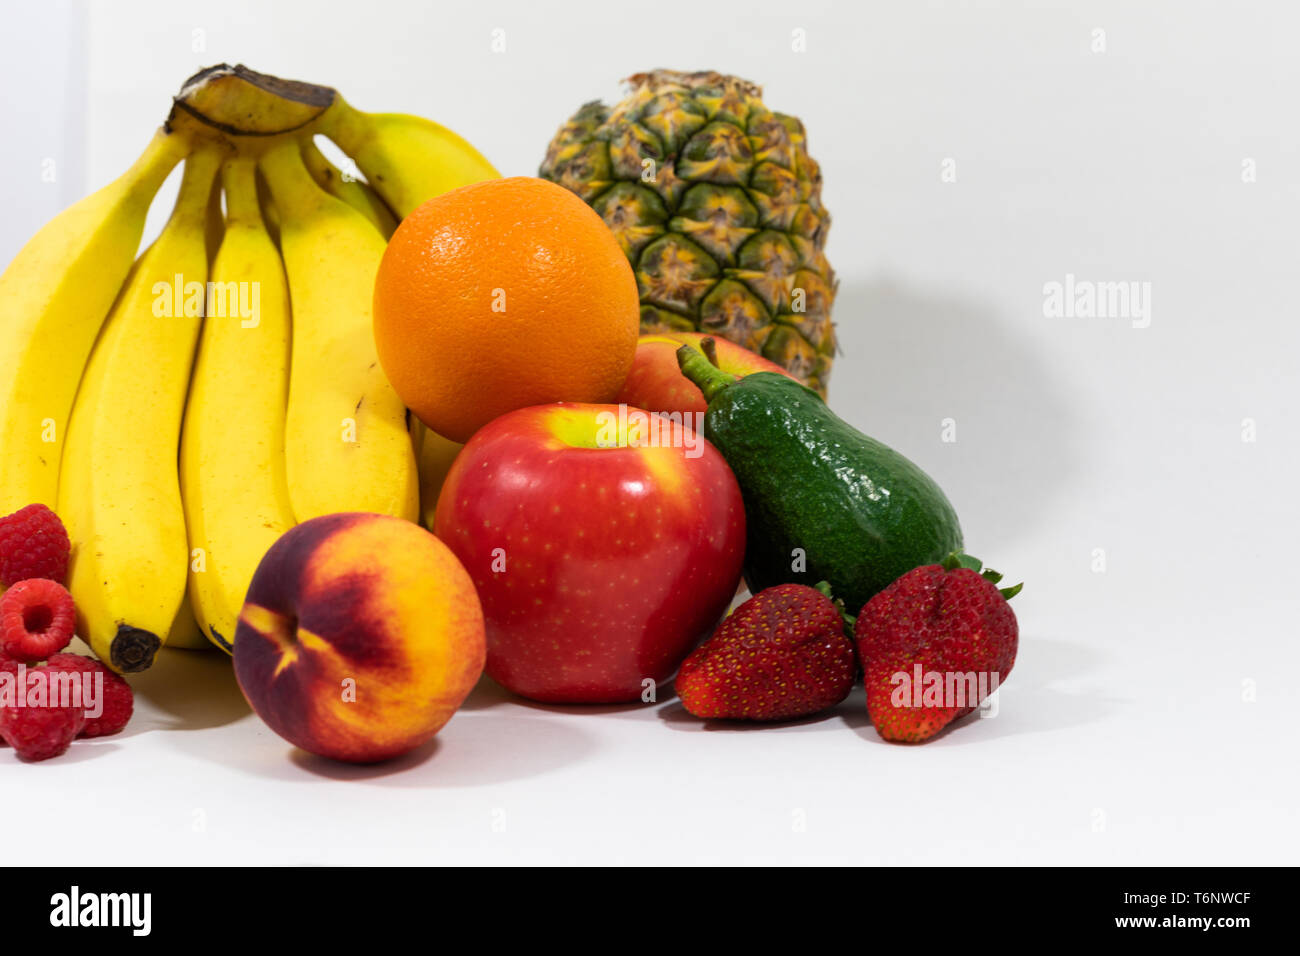 Arranged assortment of fresh, organic fruits. Vegan and clean eating lifestyles, promoting health and wellbeing, Vitamins and weight loss Stock Photo